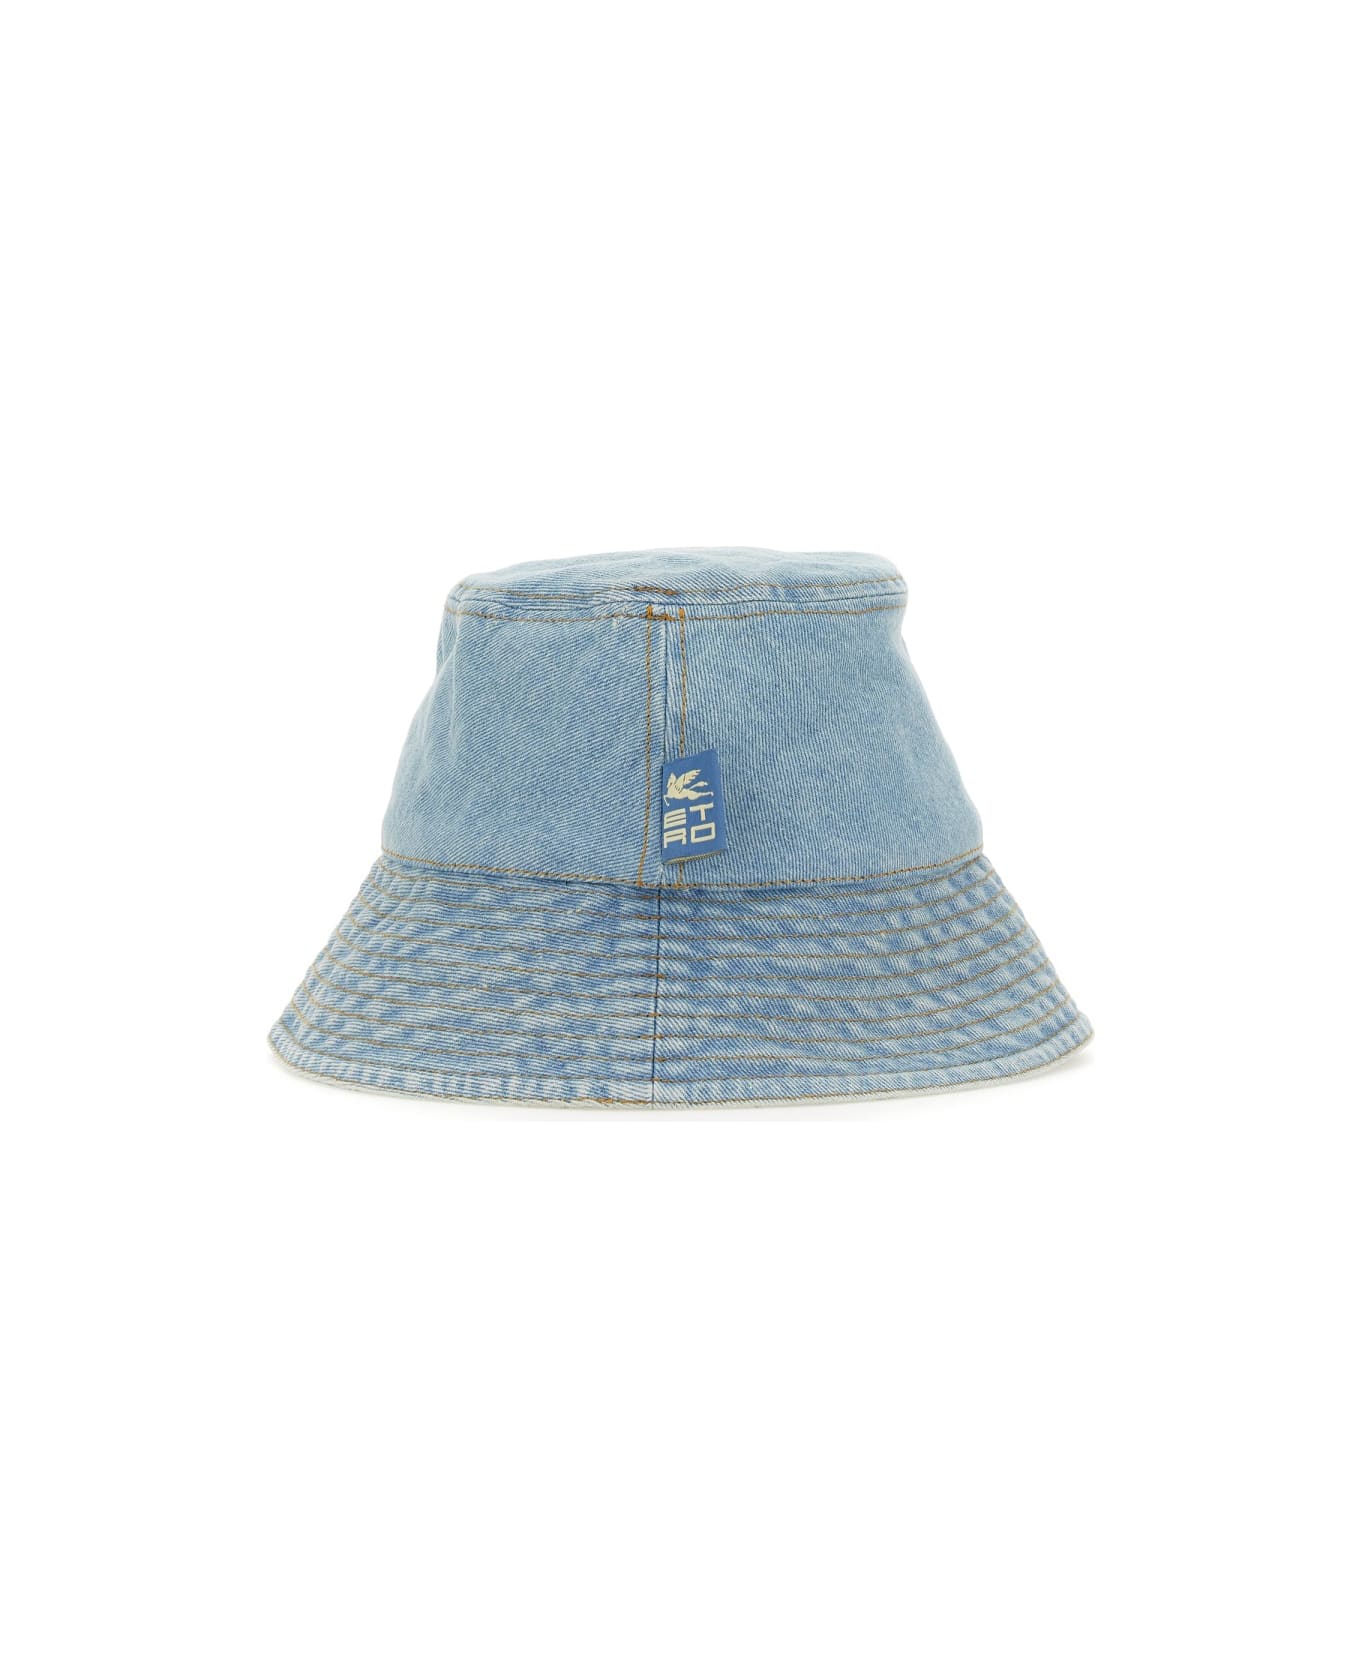 Etro Denim Bucket Hat With Embroidery - Blue